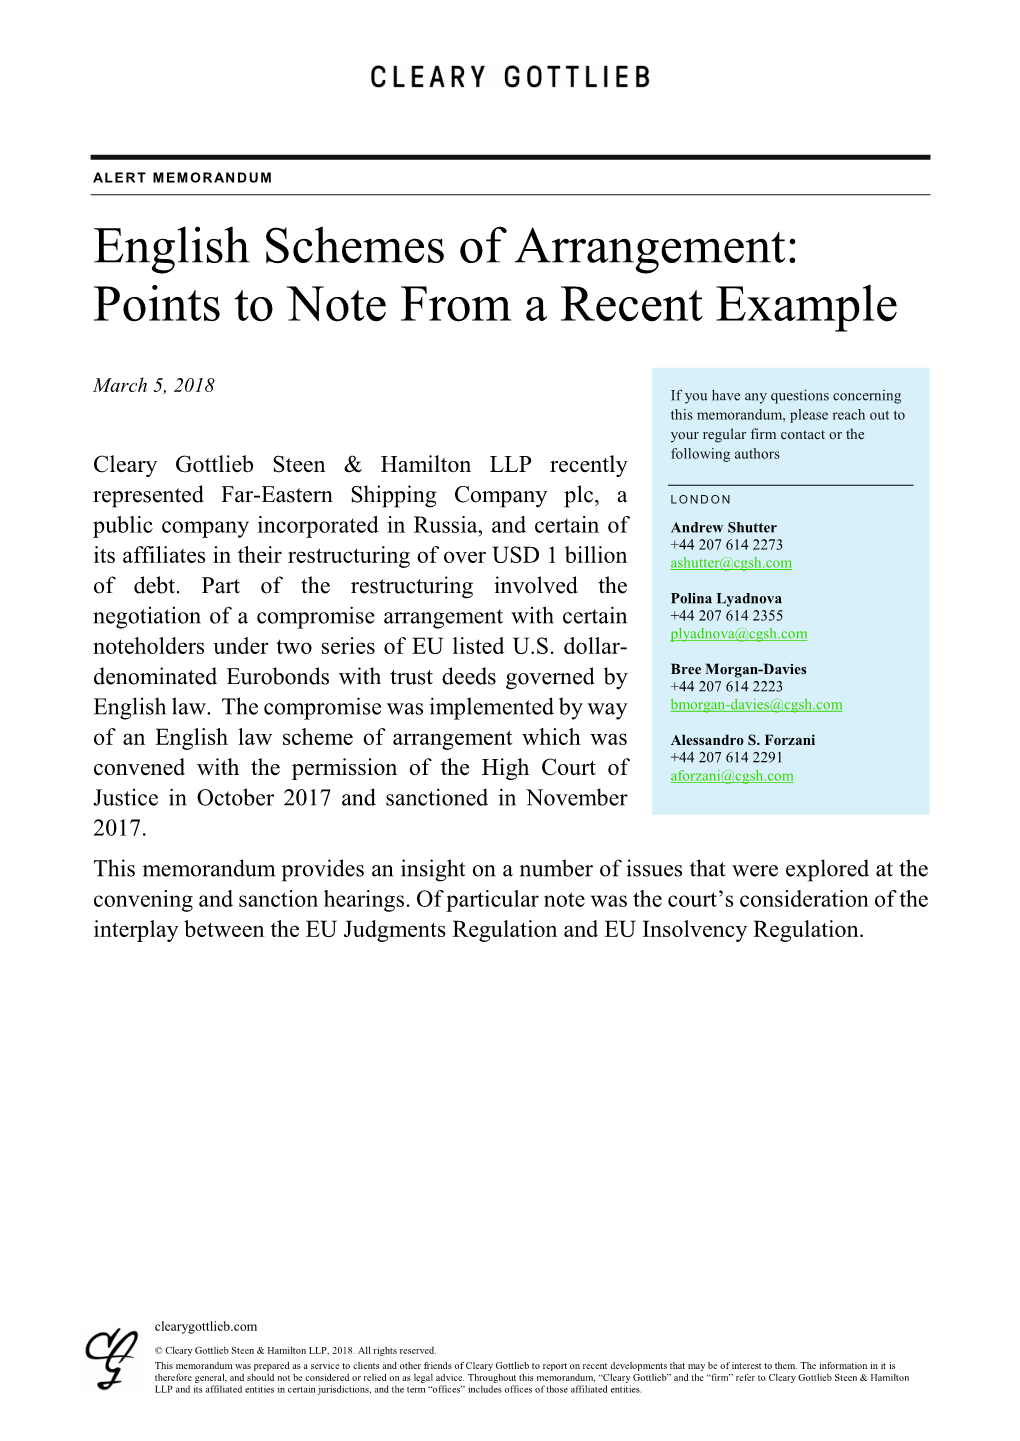 English Schemes of Arrangement: Points to Note from a Recent Example